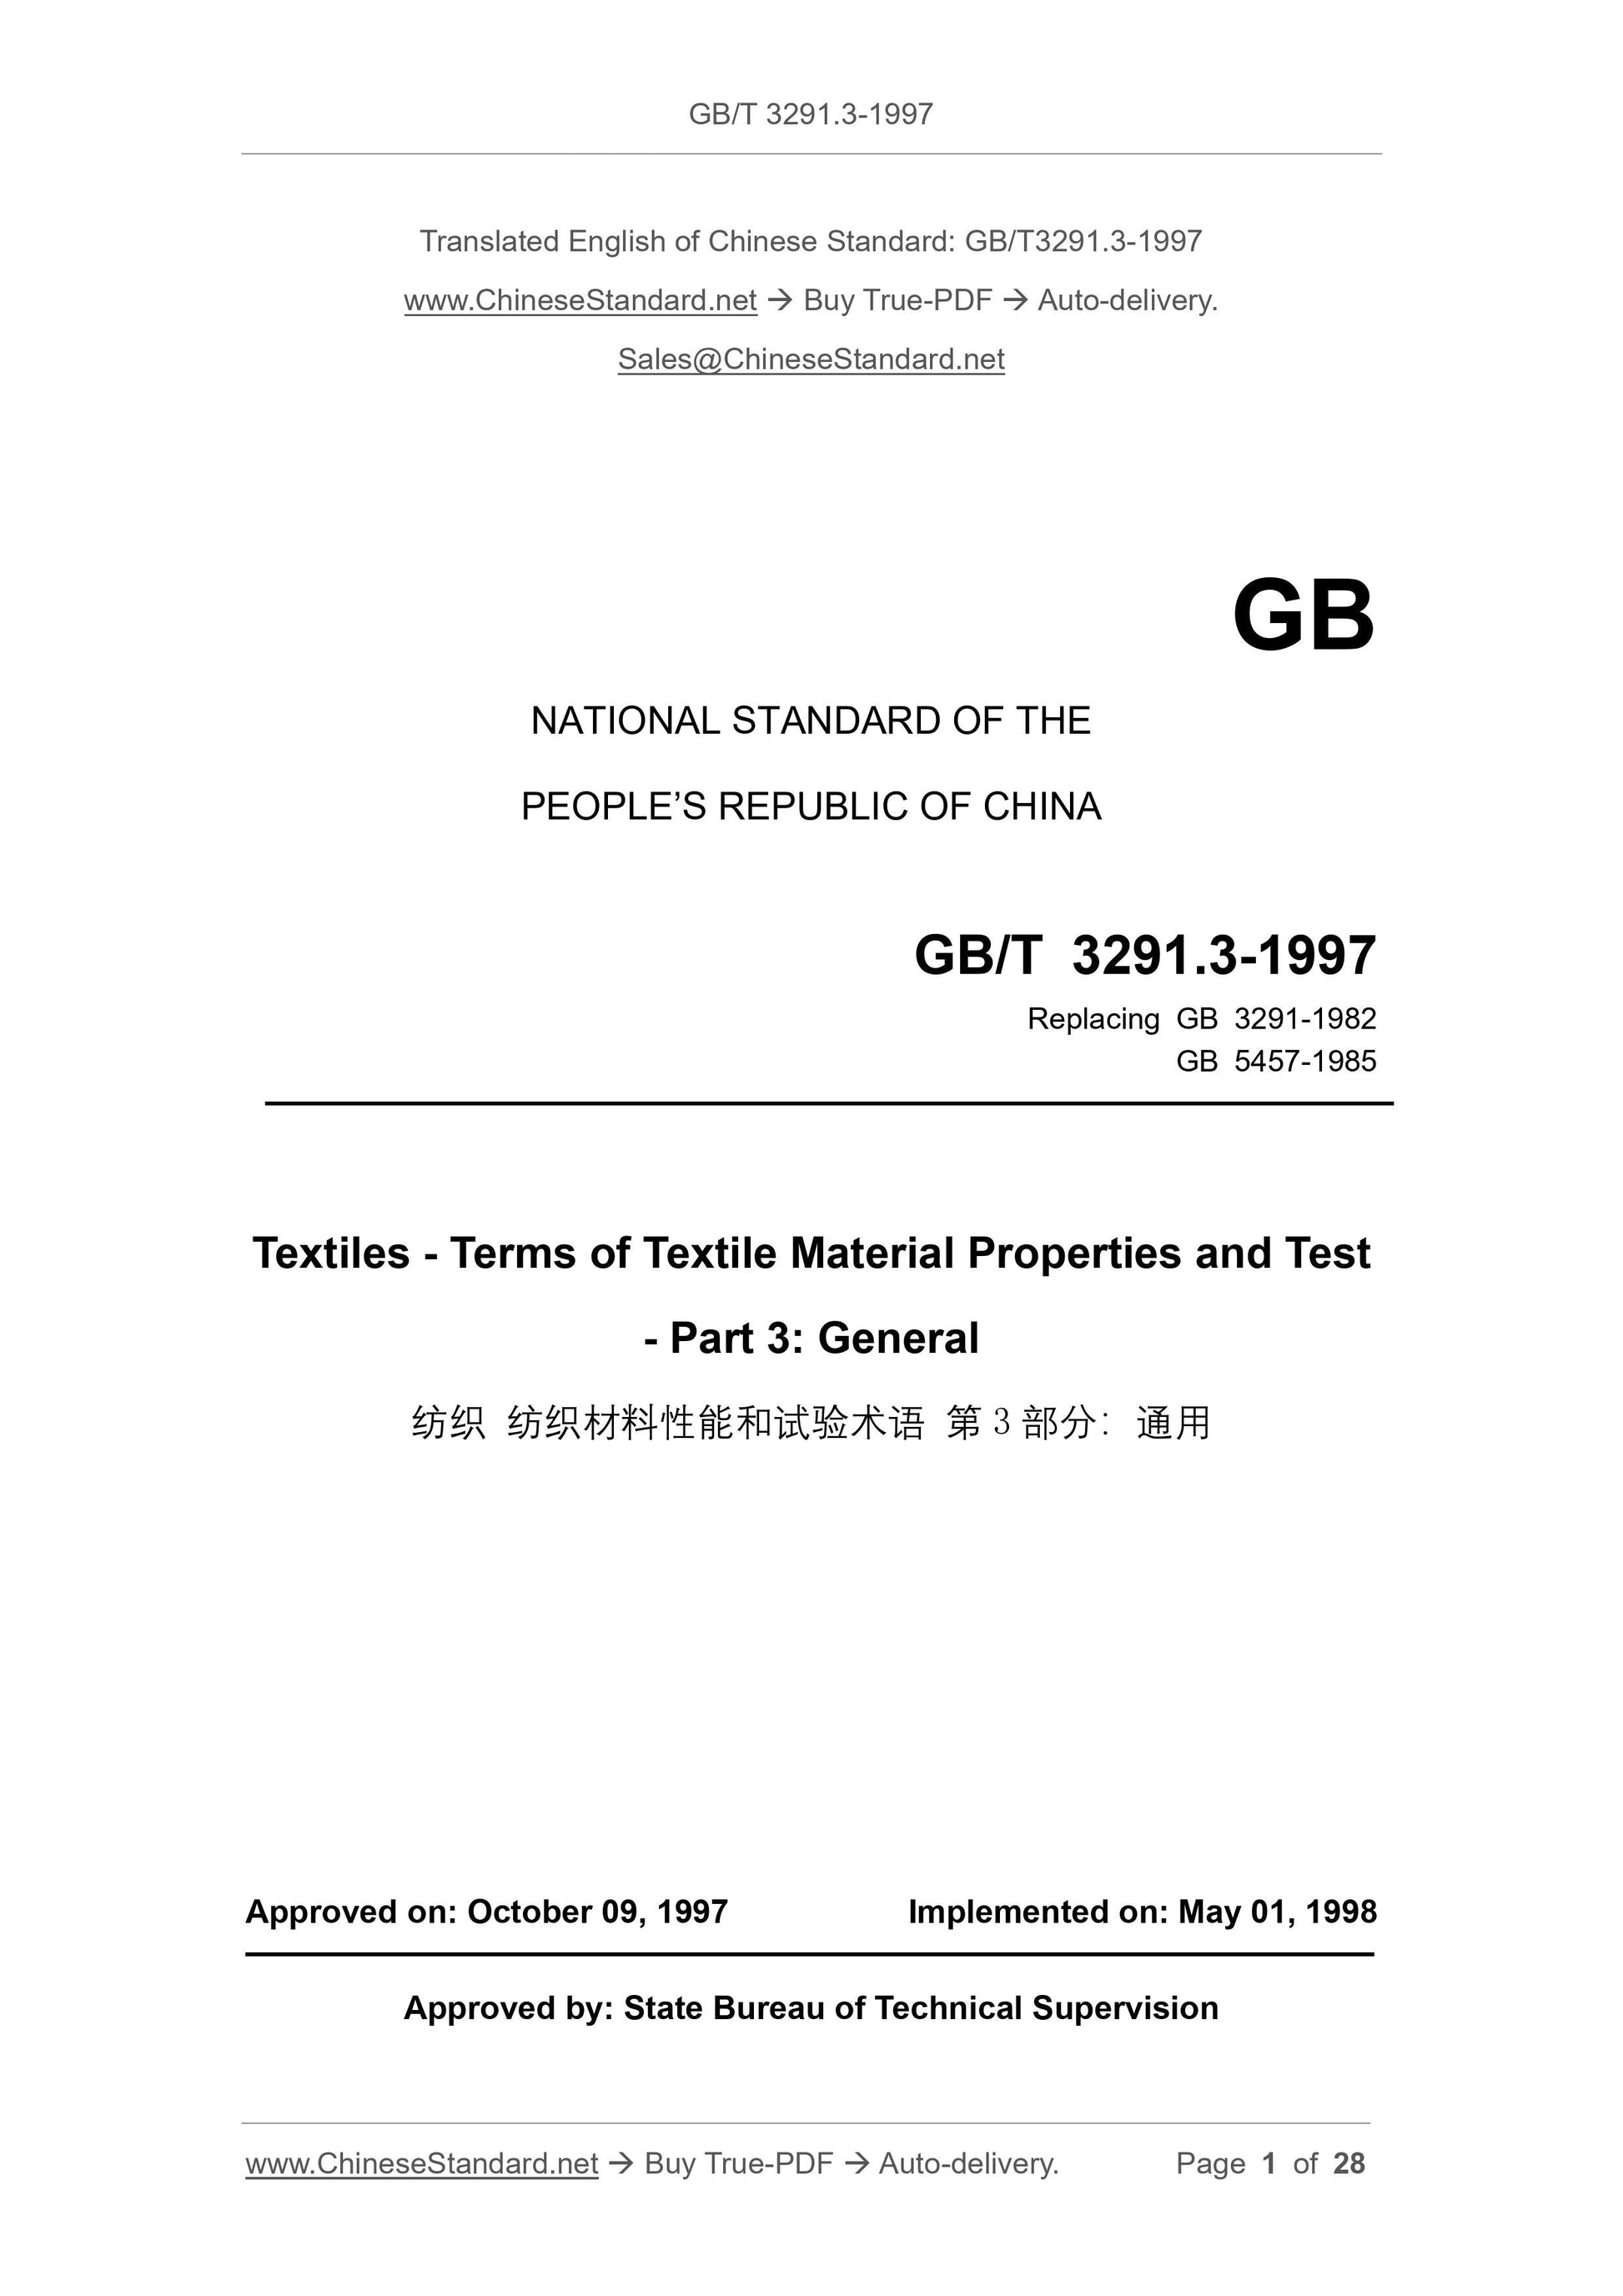 GB/T 3291.3-1997 Page 1